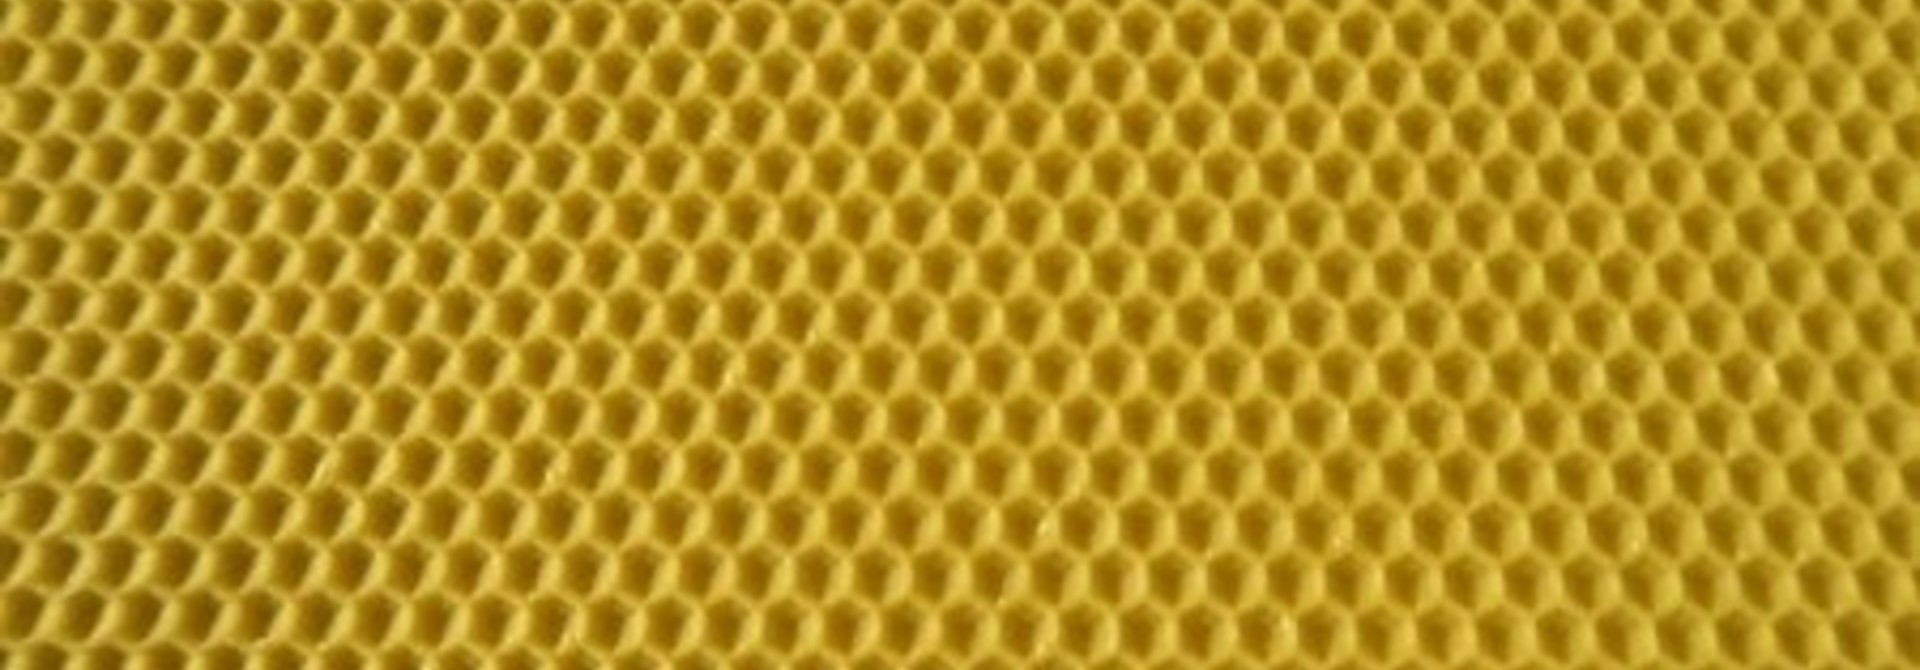 Certified beeswax foundation - Langstroth